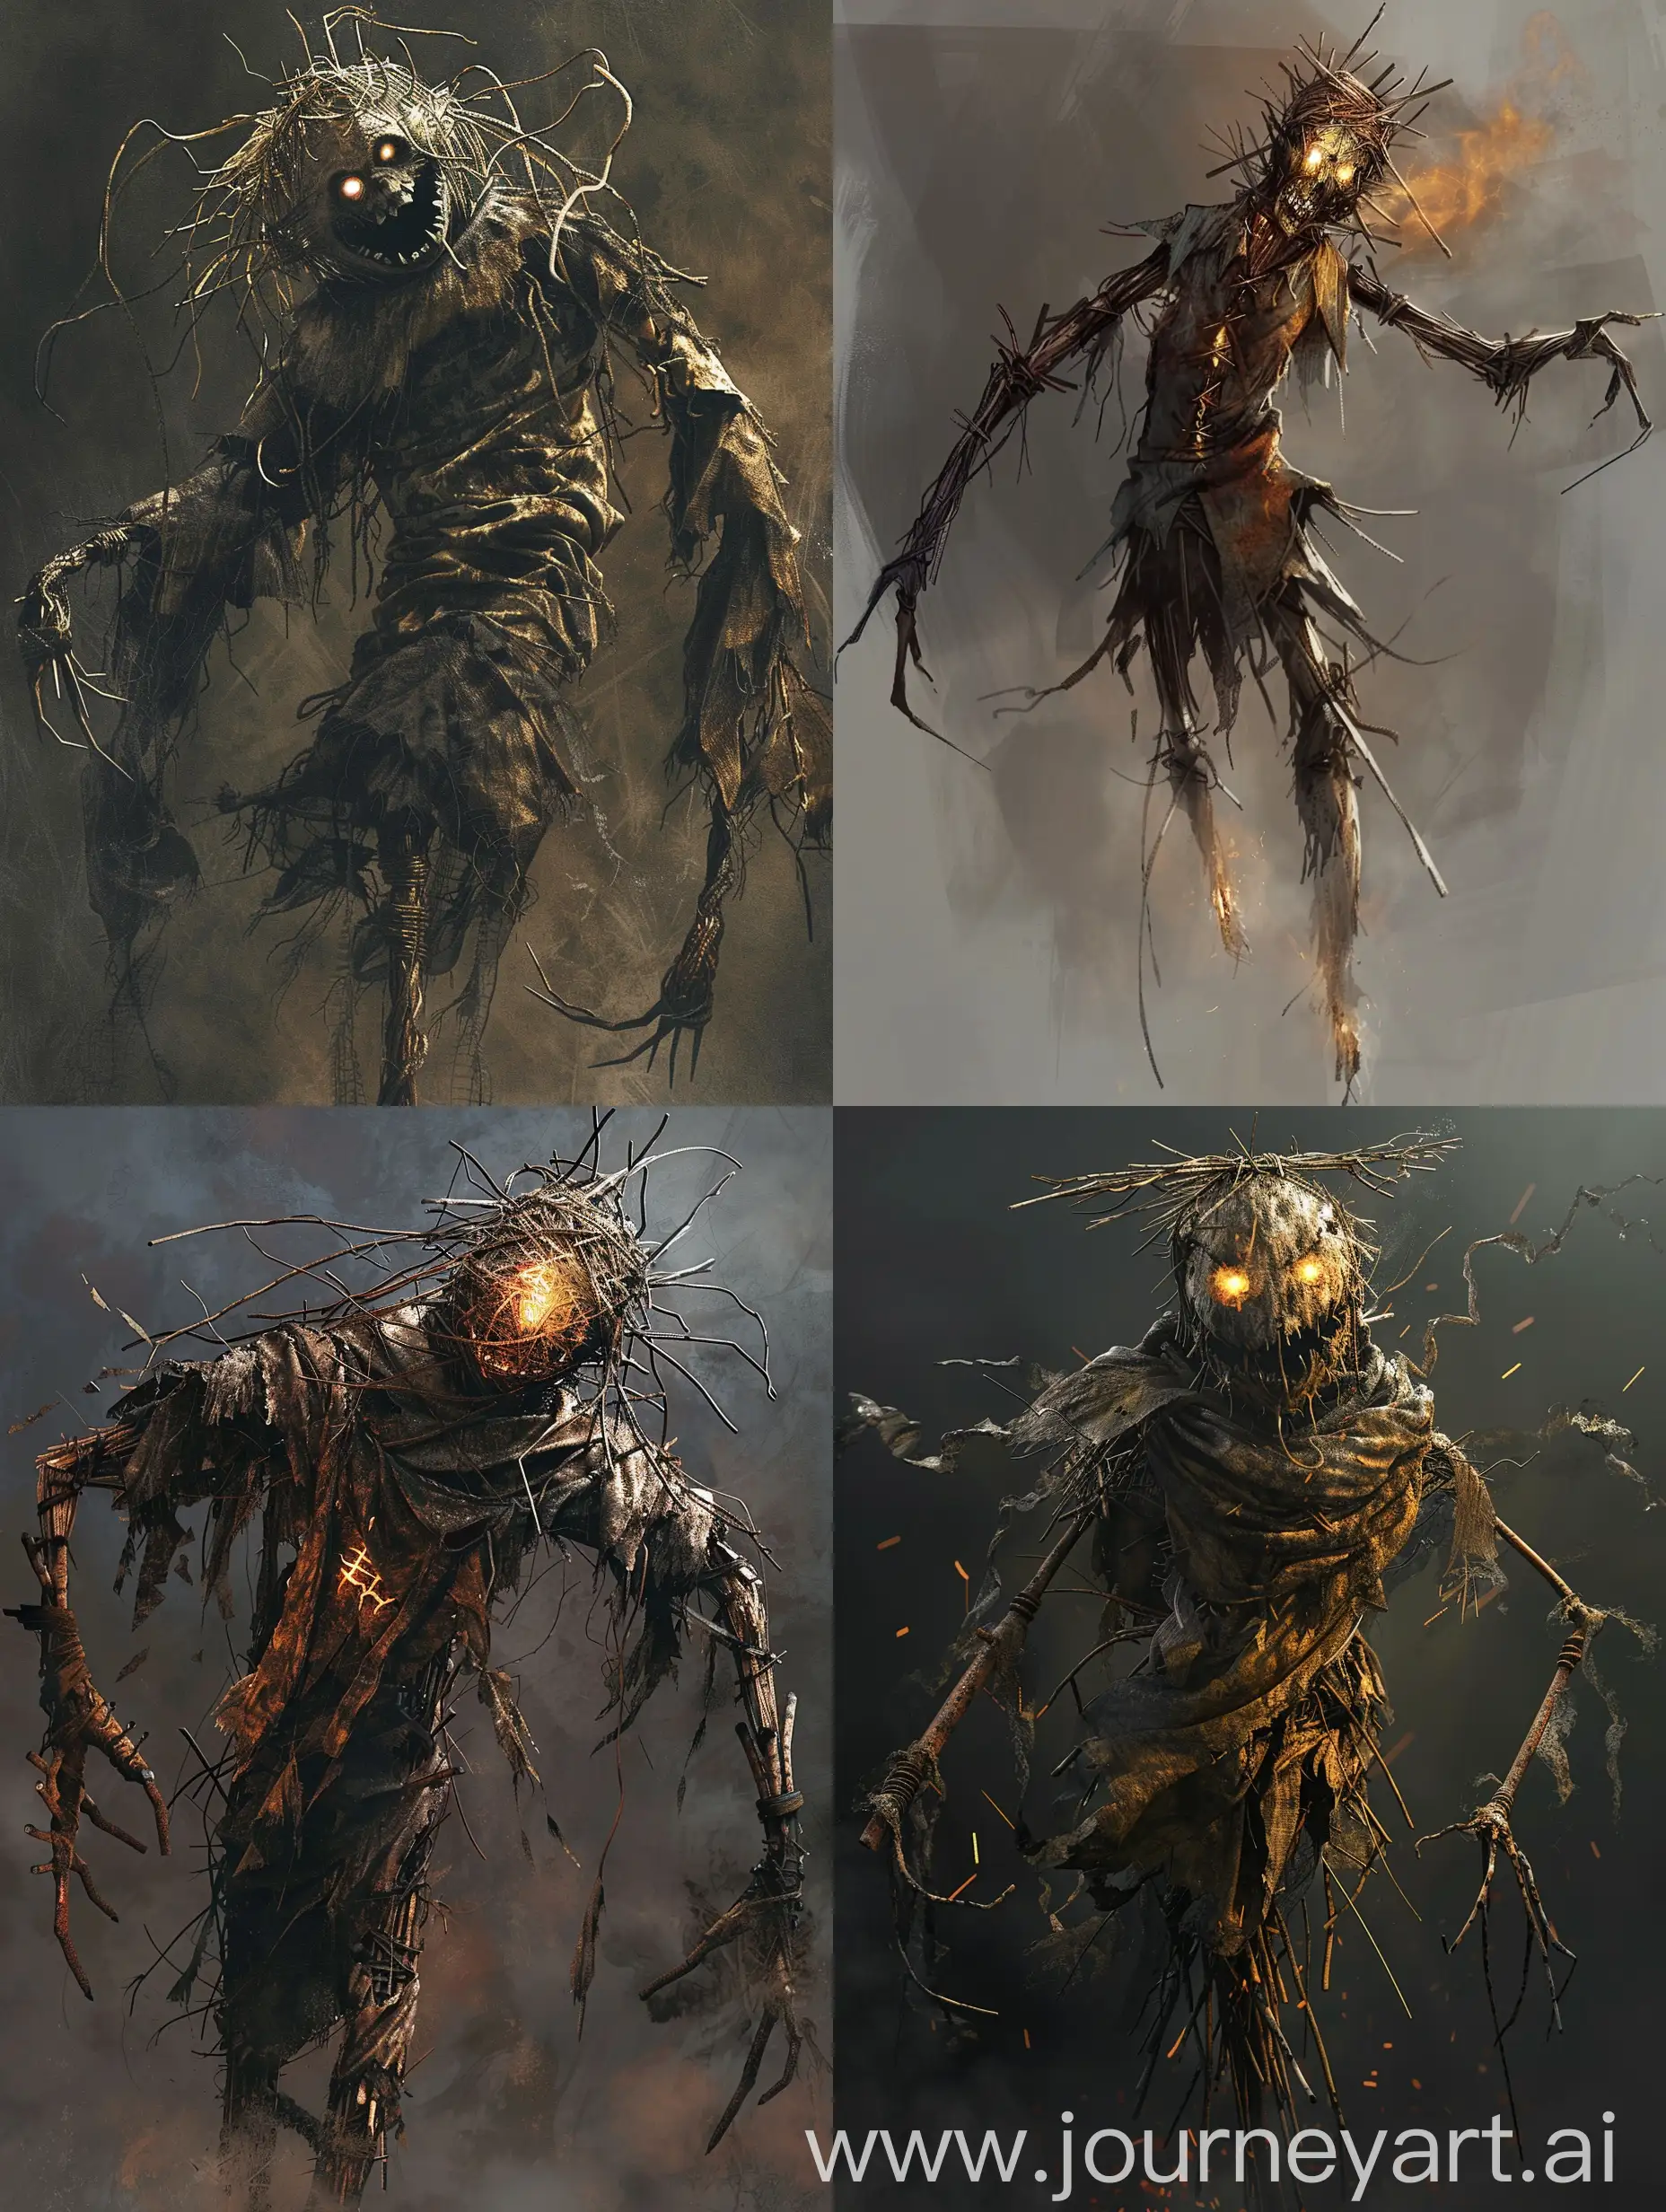 demonic-evil-scarecrow-straw-rags-twisted-leering-face-wood-head-long-thin-arms-sharp-claws-rusted-metal-glowing-eyes-otherworldly-fire-faint-aura-malevolence-fluttering-clothes-moving-arms-alive-seeking-victims-dark-maste
